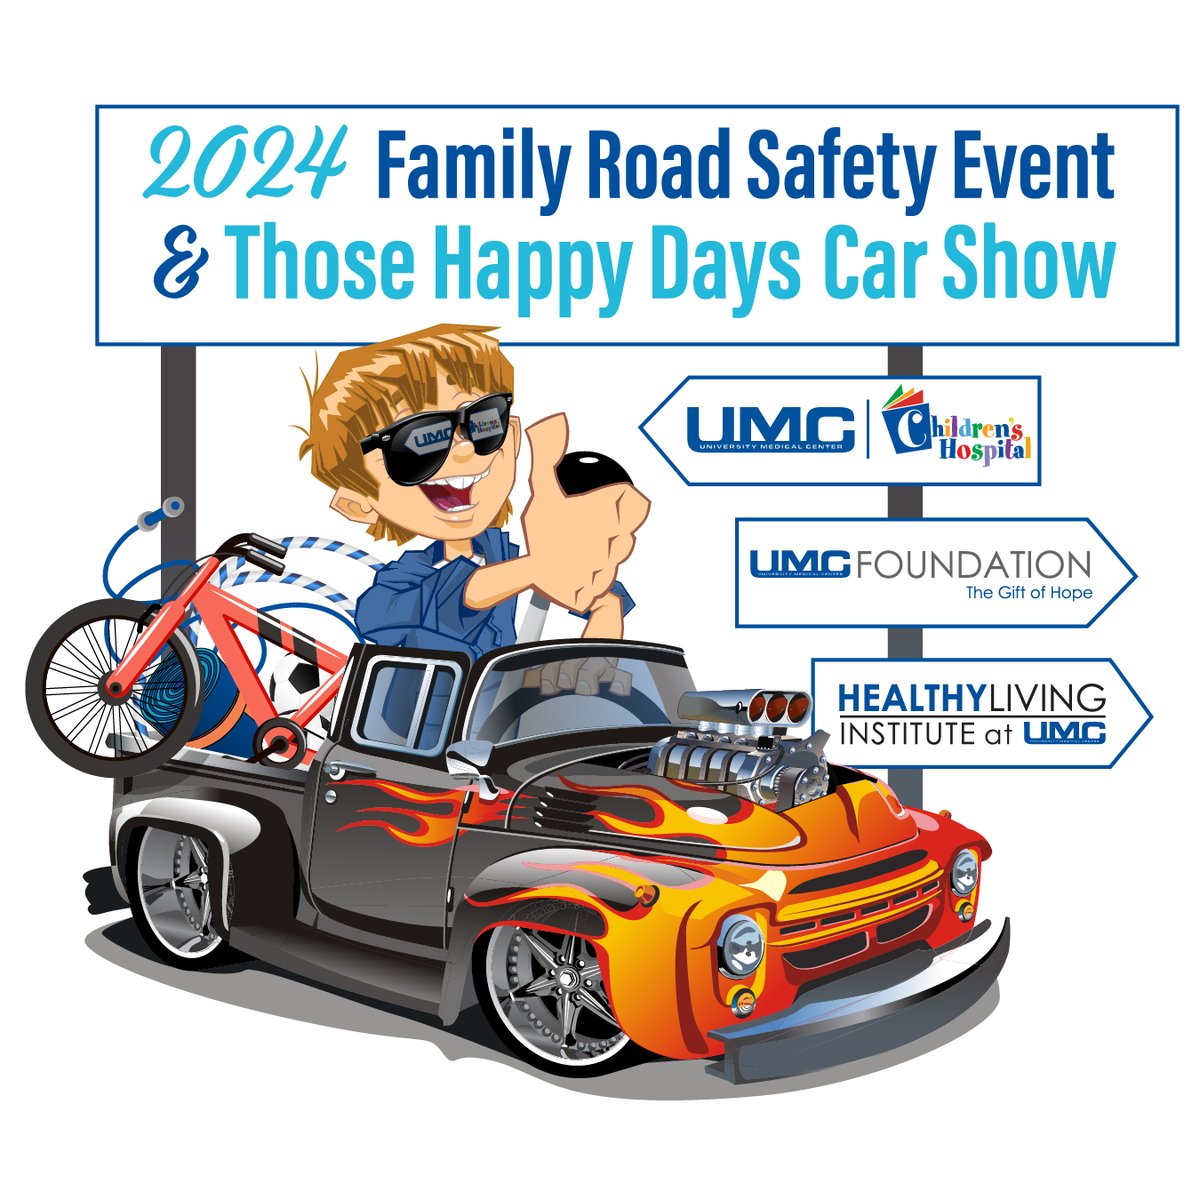 🎨🏆 It's the ultimate prize! Patients are helping us design our trophies for the @umcsnfoundation's 'Those Happy Days' Car Show! This event is happening alongside UMC's Family Road Safety Event to raise valuable funds for UMC Children's Hospital.